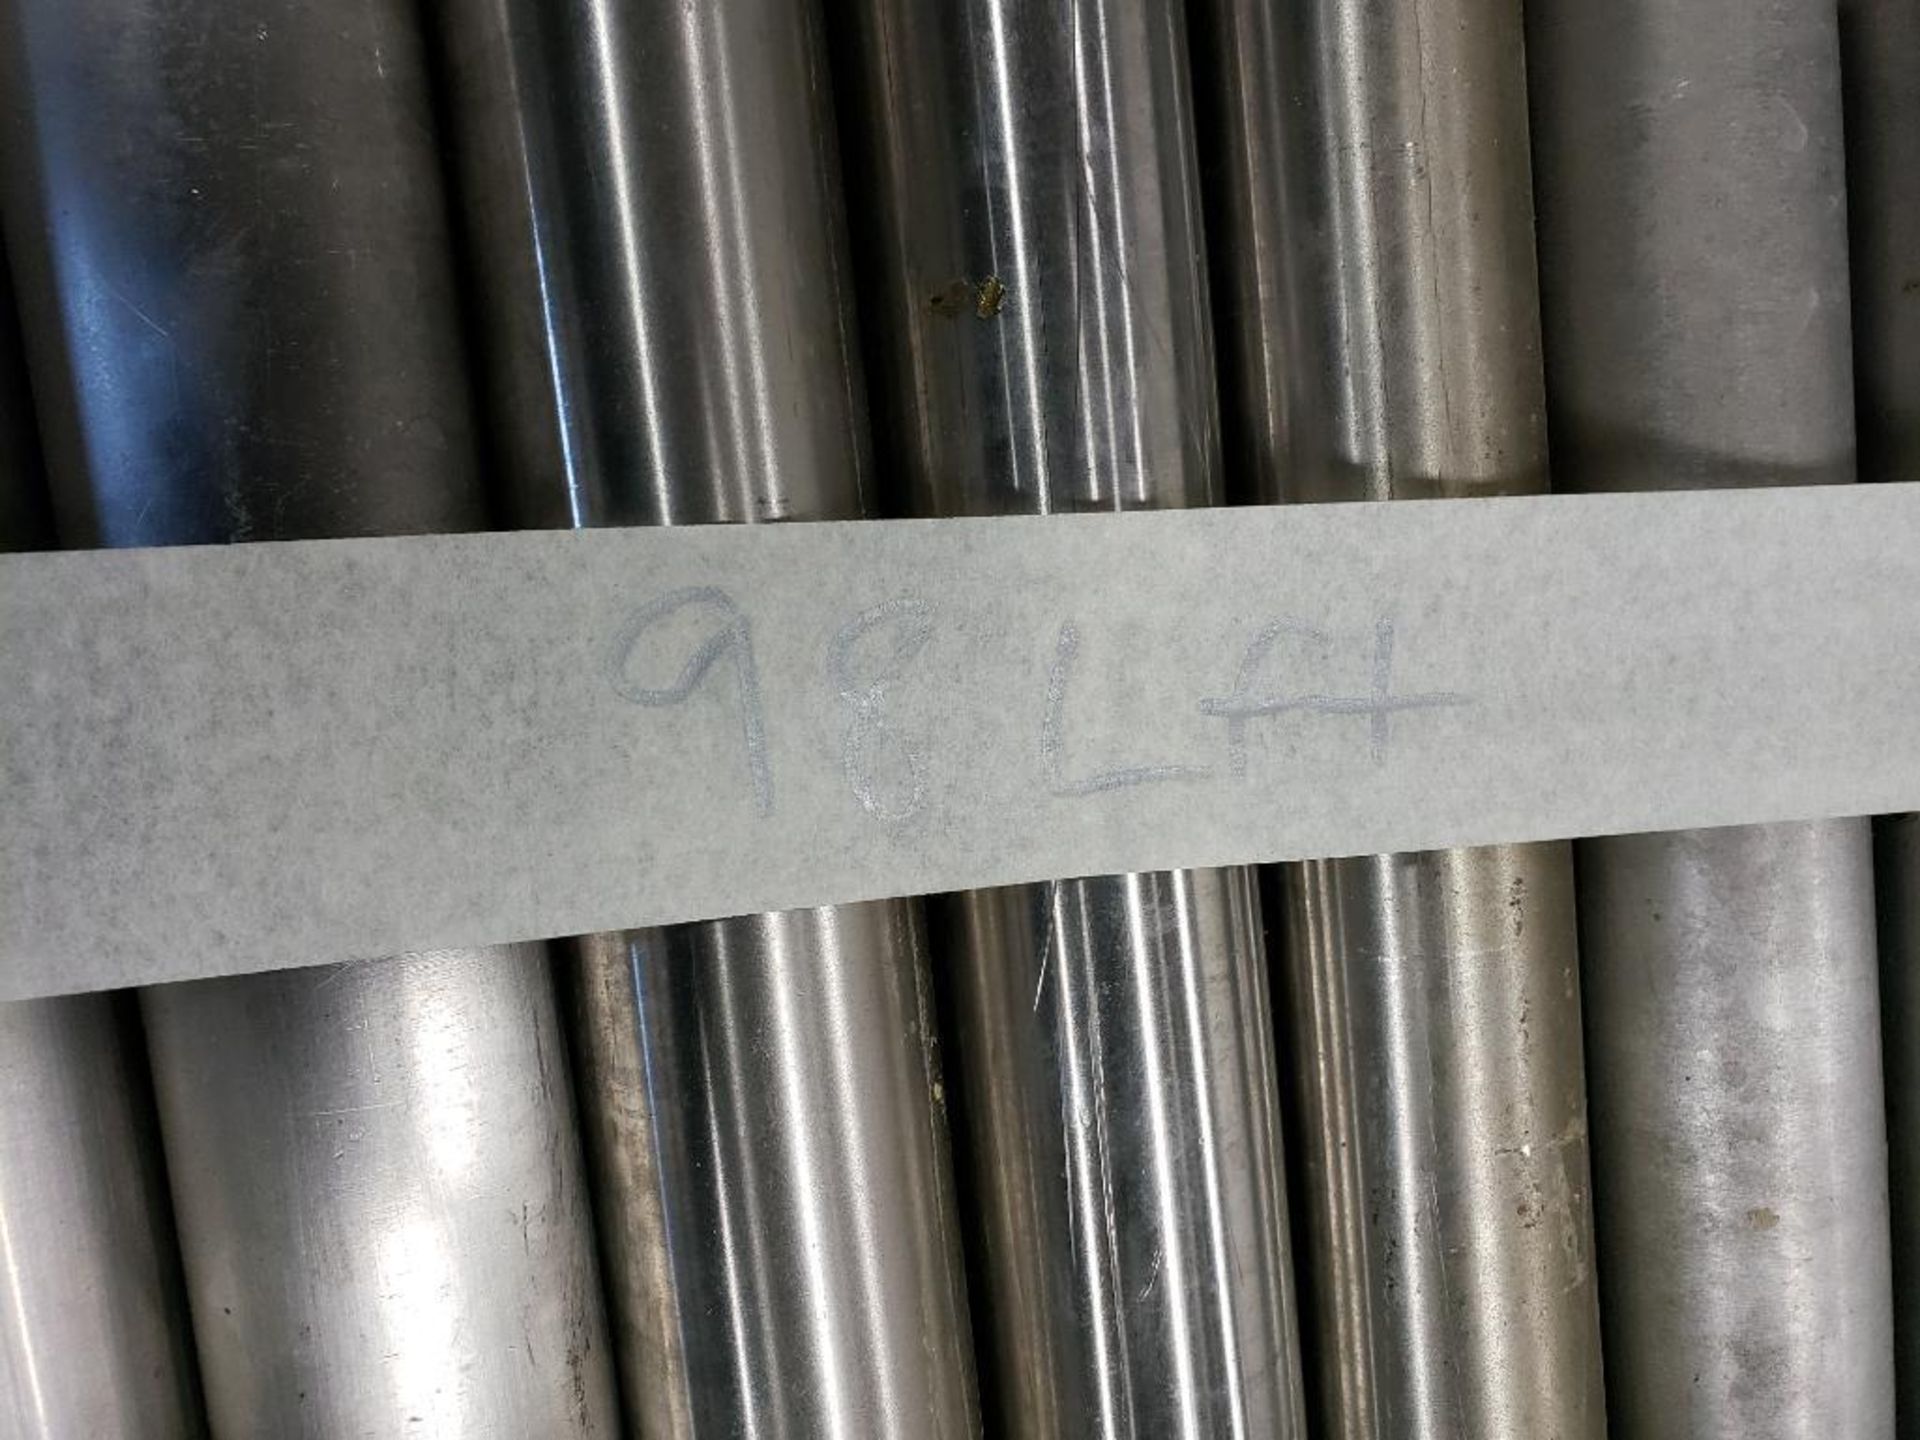 2 inch - Approx 98 total feet of 2in stainless food grade pipe in assorted lengths. - Image 8 of 10